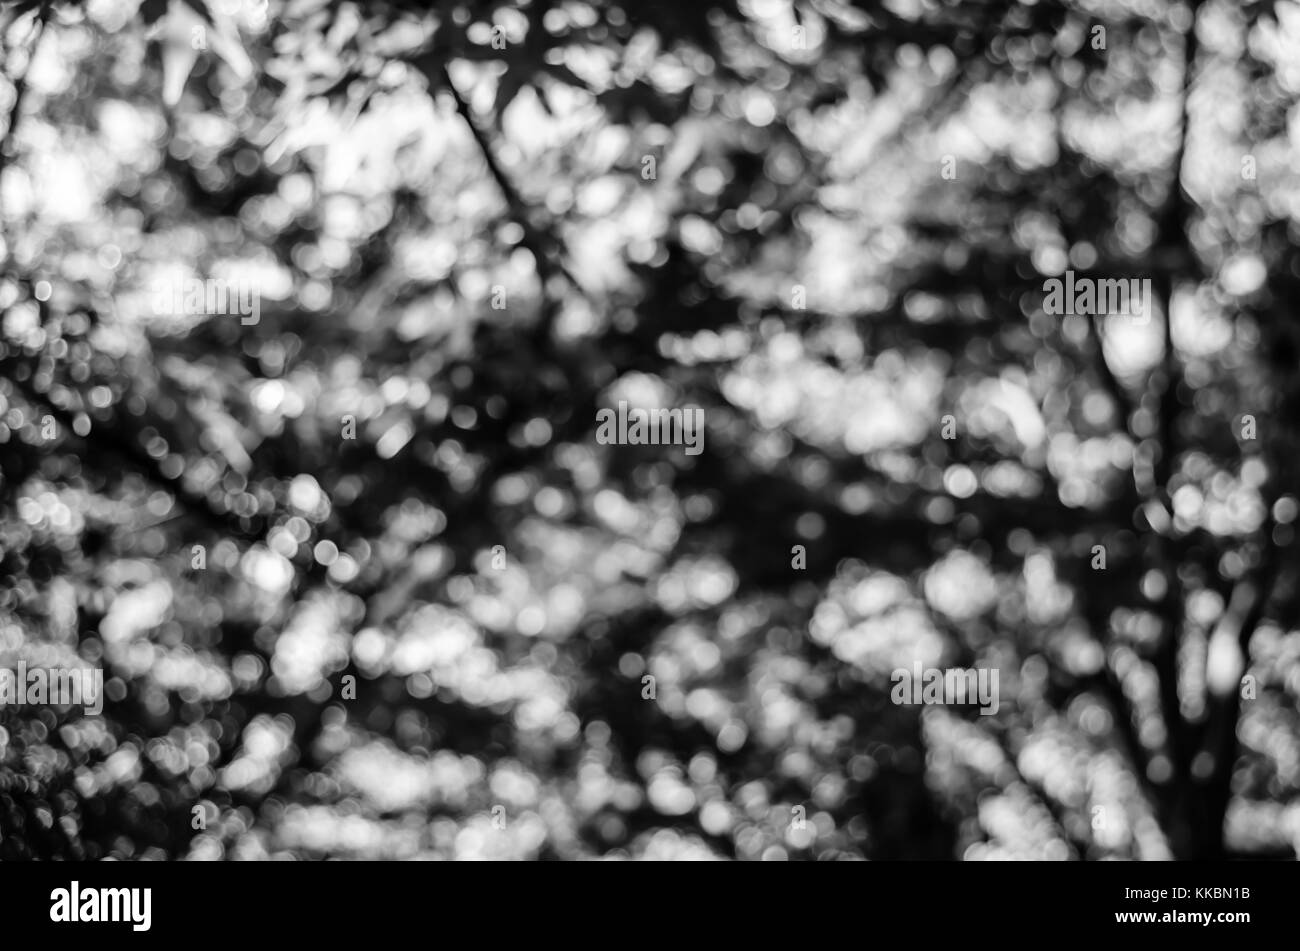 Blurred black and white abstract pattern background Stock Photo - Alamy